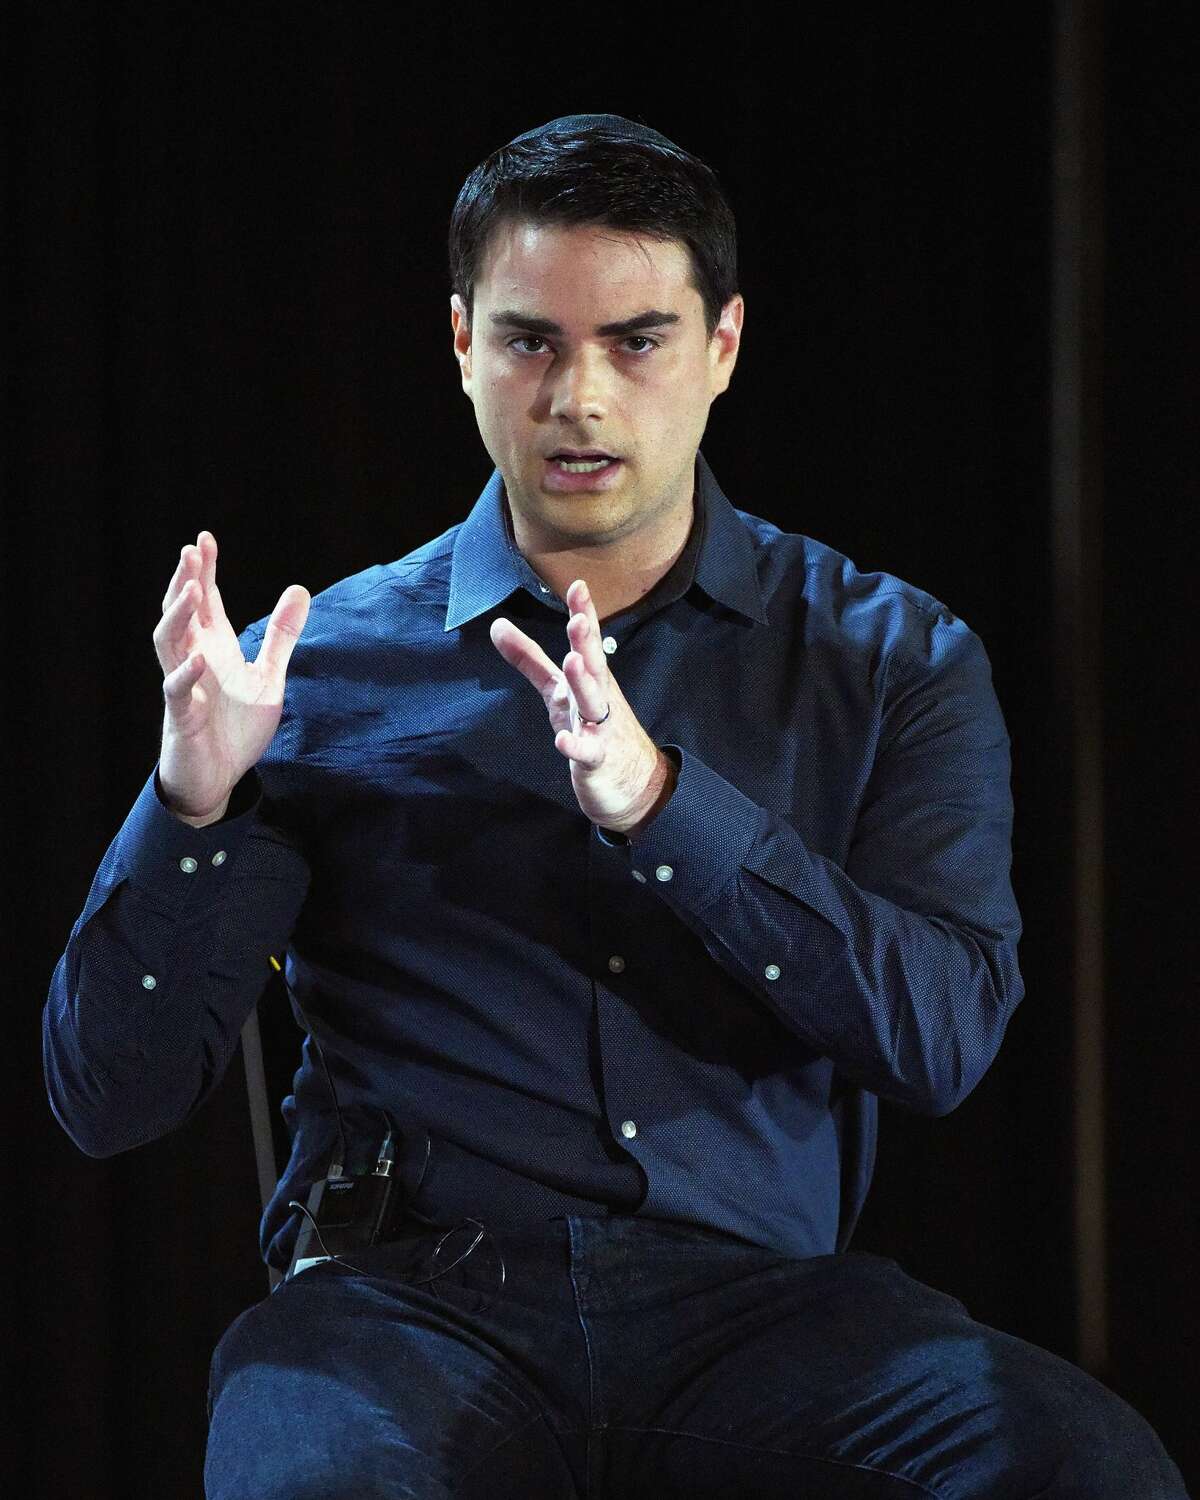 Cal brouhaha over conservative pundit Ben Shapiro's planned visit